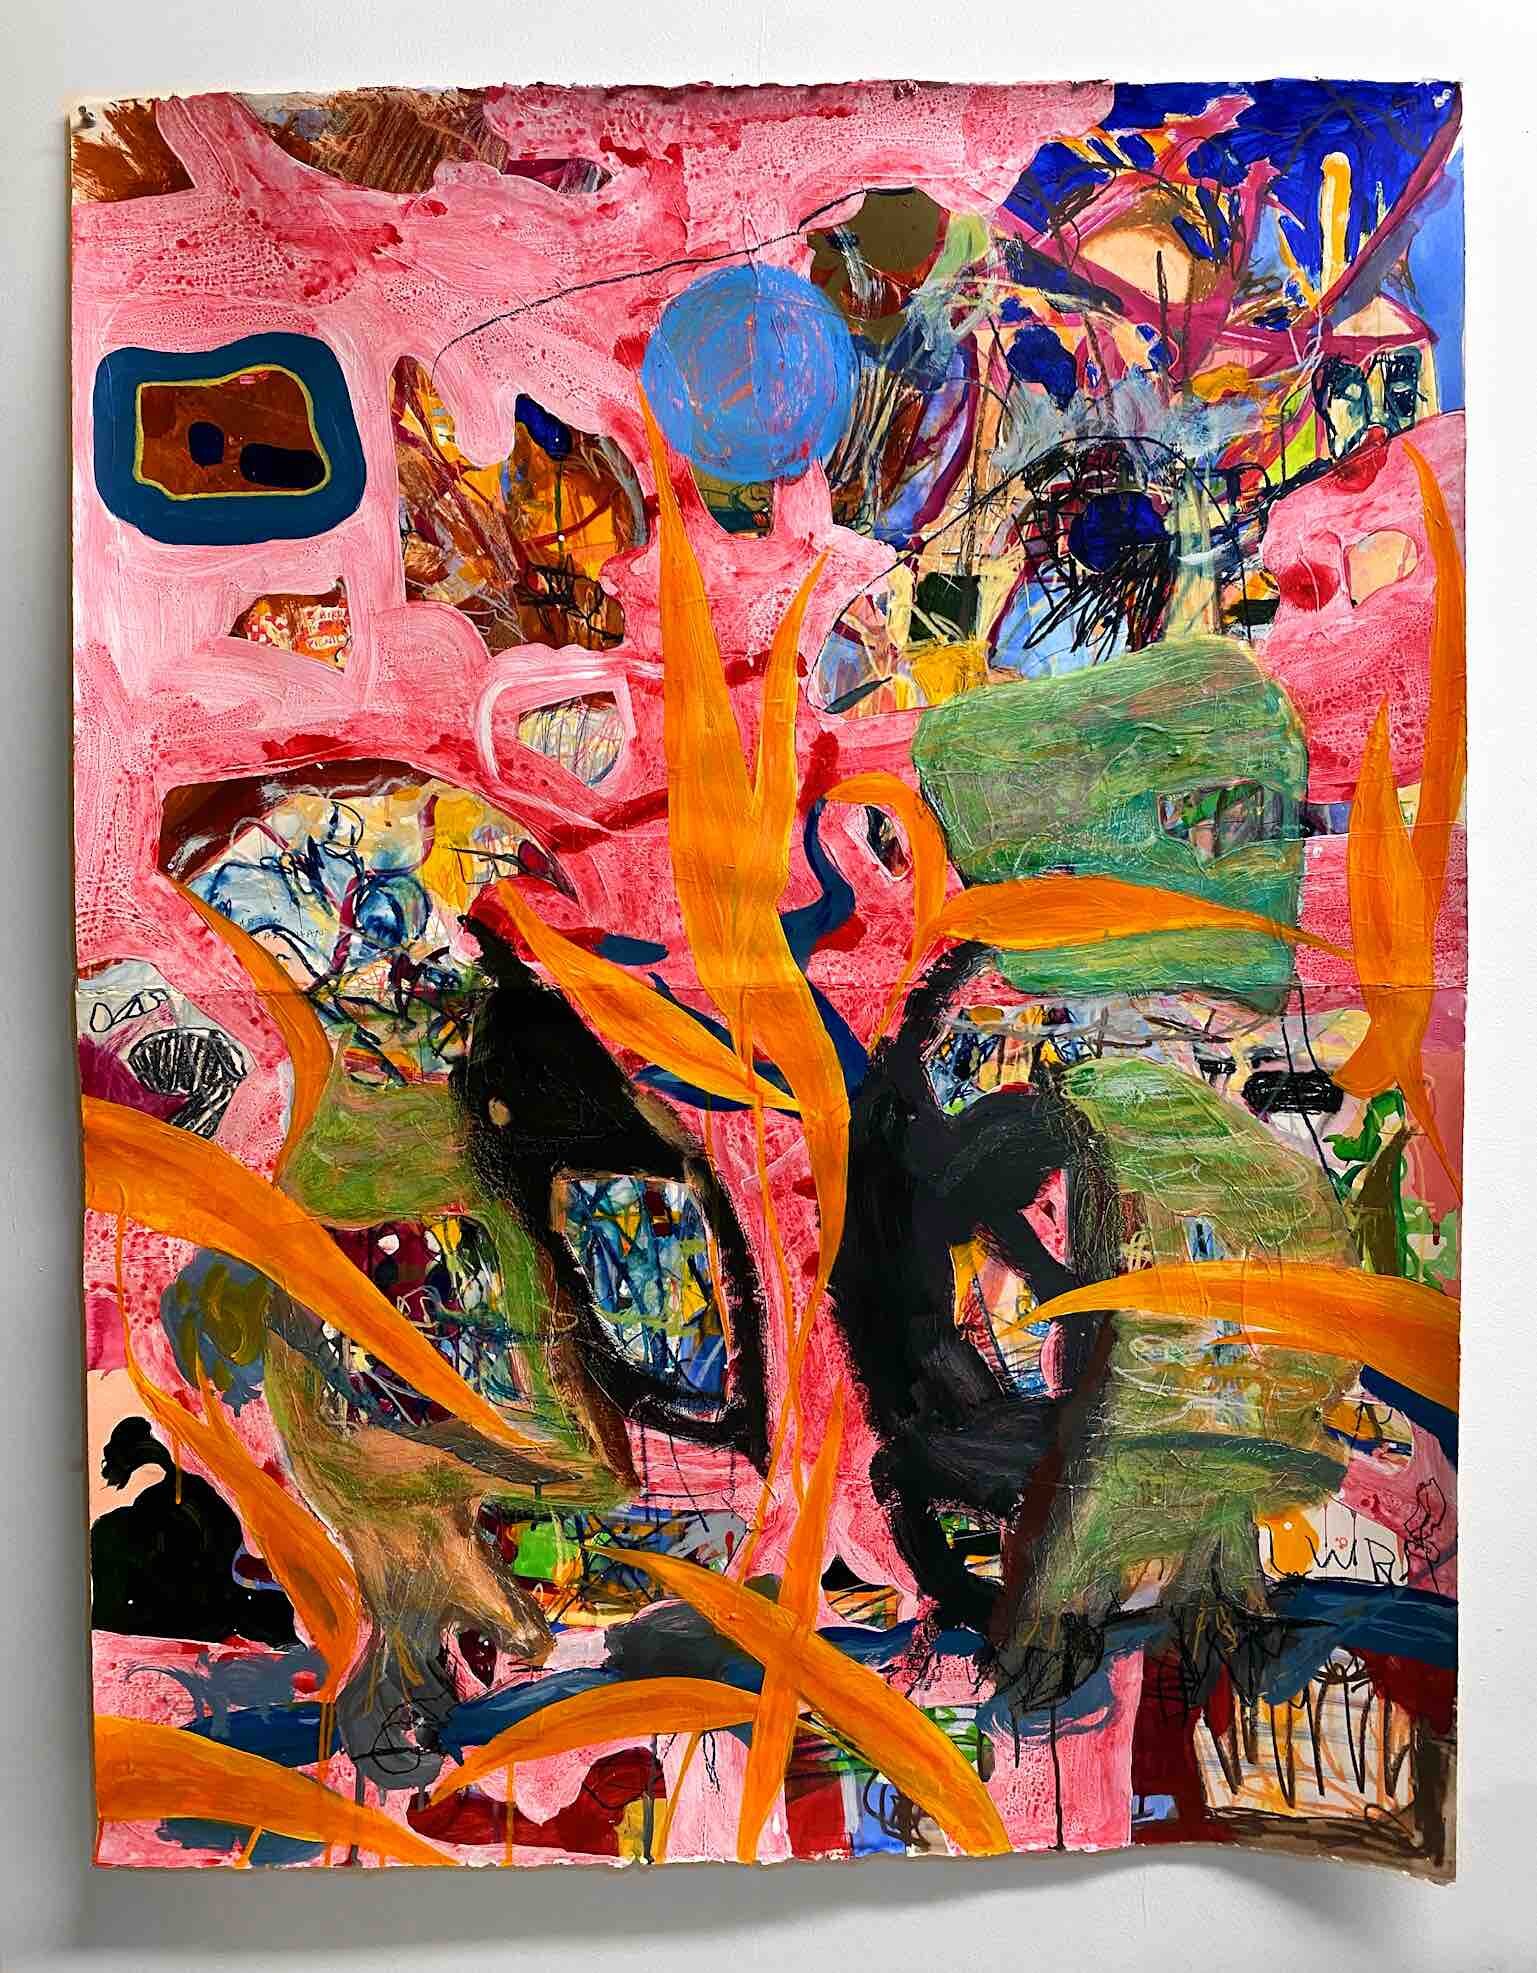     JARED HOFFMAN    Two Bird Picnic , 2021  Acrylic, Ink, and Wax Crayon on Two Sheets of Hot Press Paper   40 x 55 inches   info@goodnakedgallery.com    